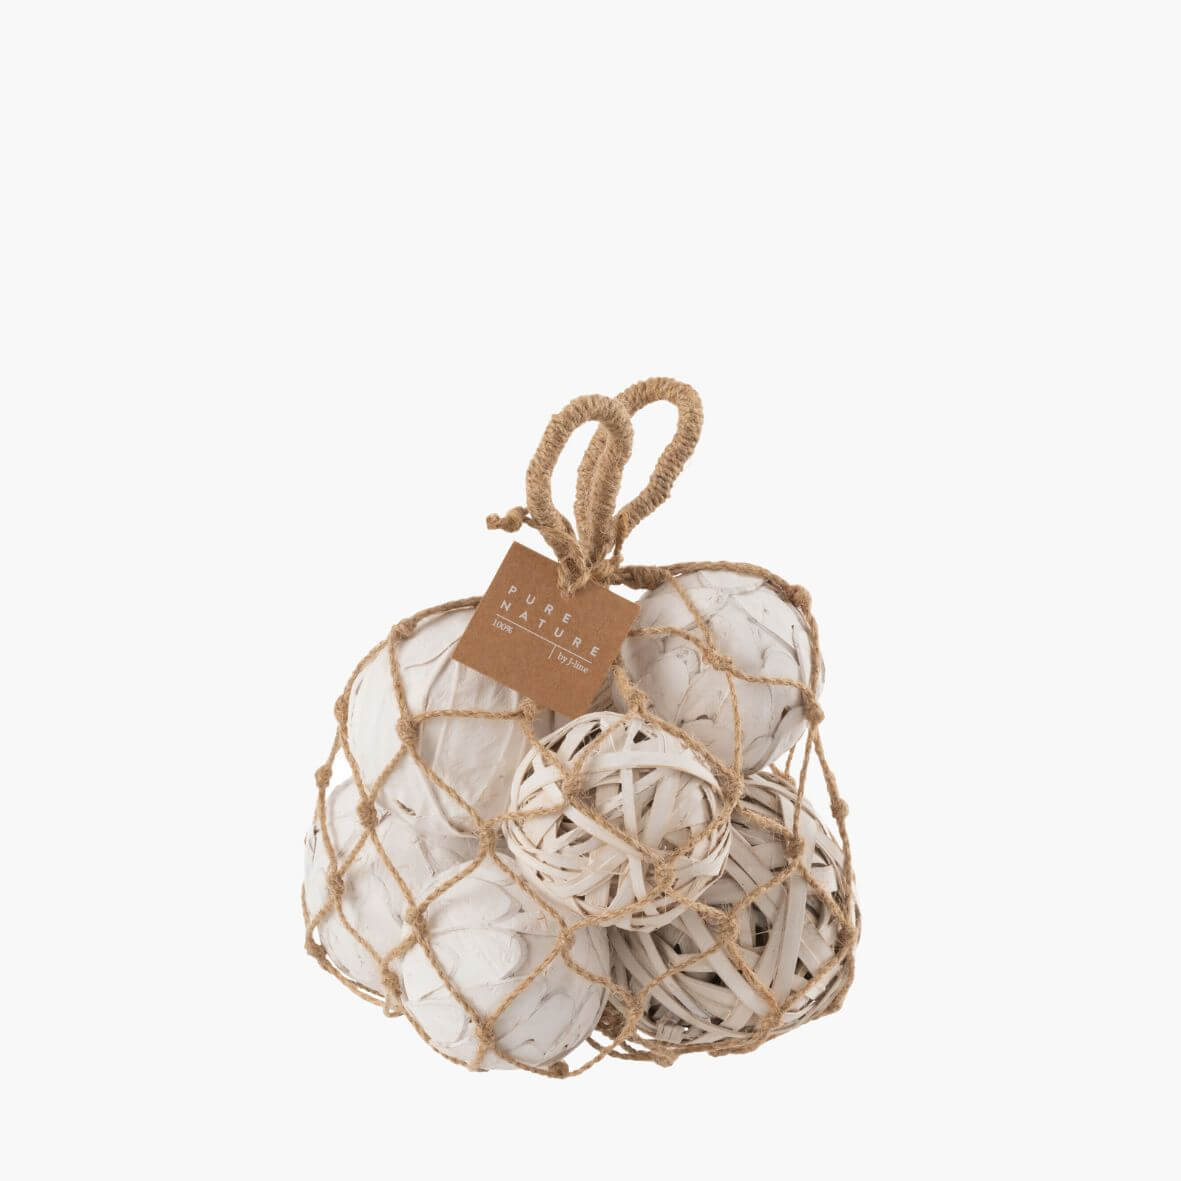 Bag of styling ball in various sizes on white background